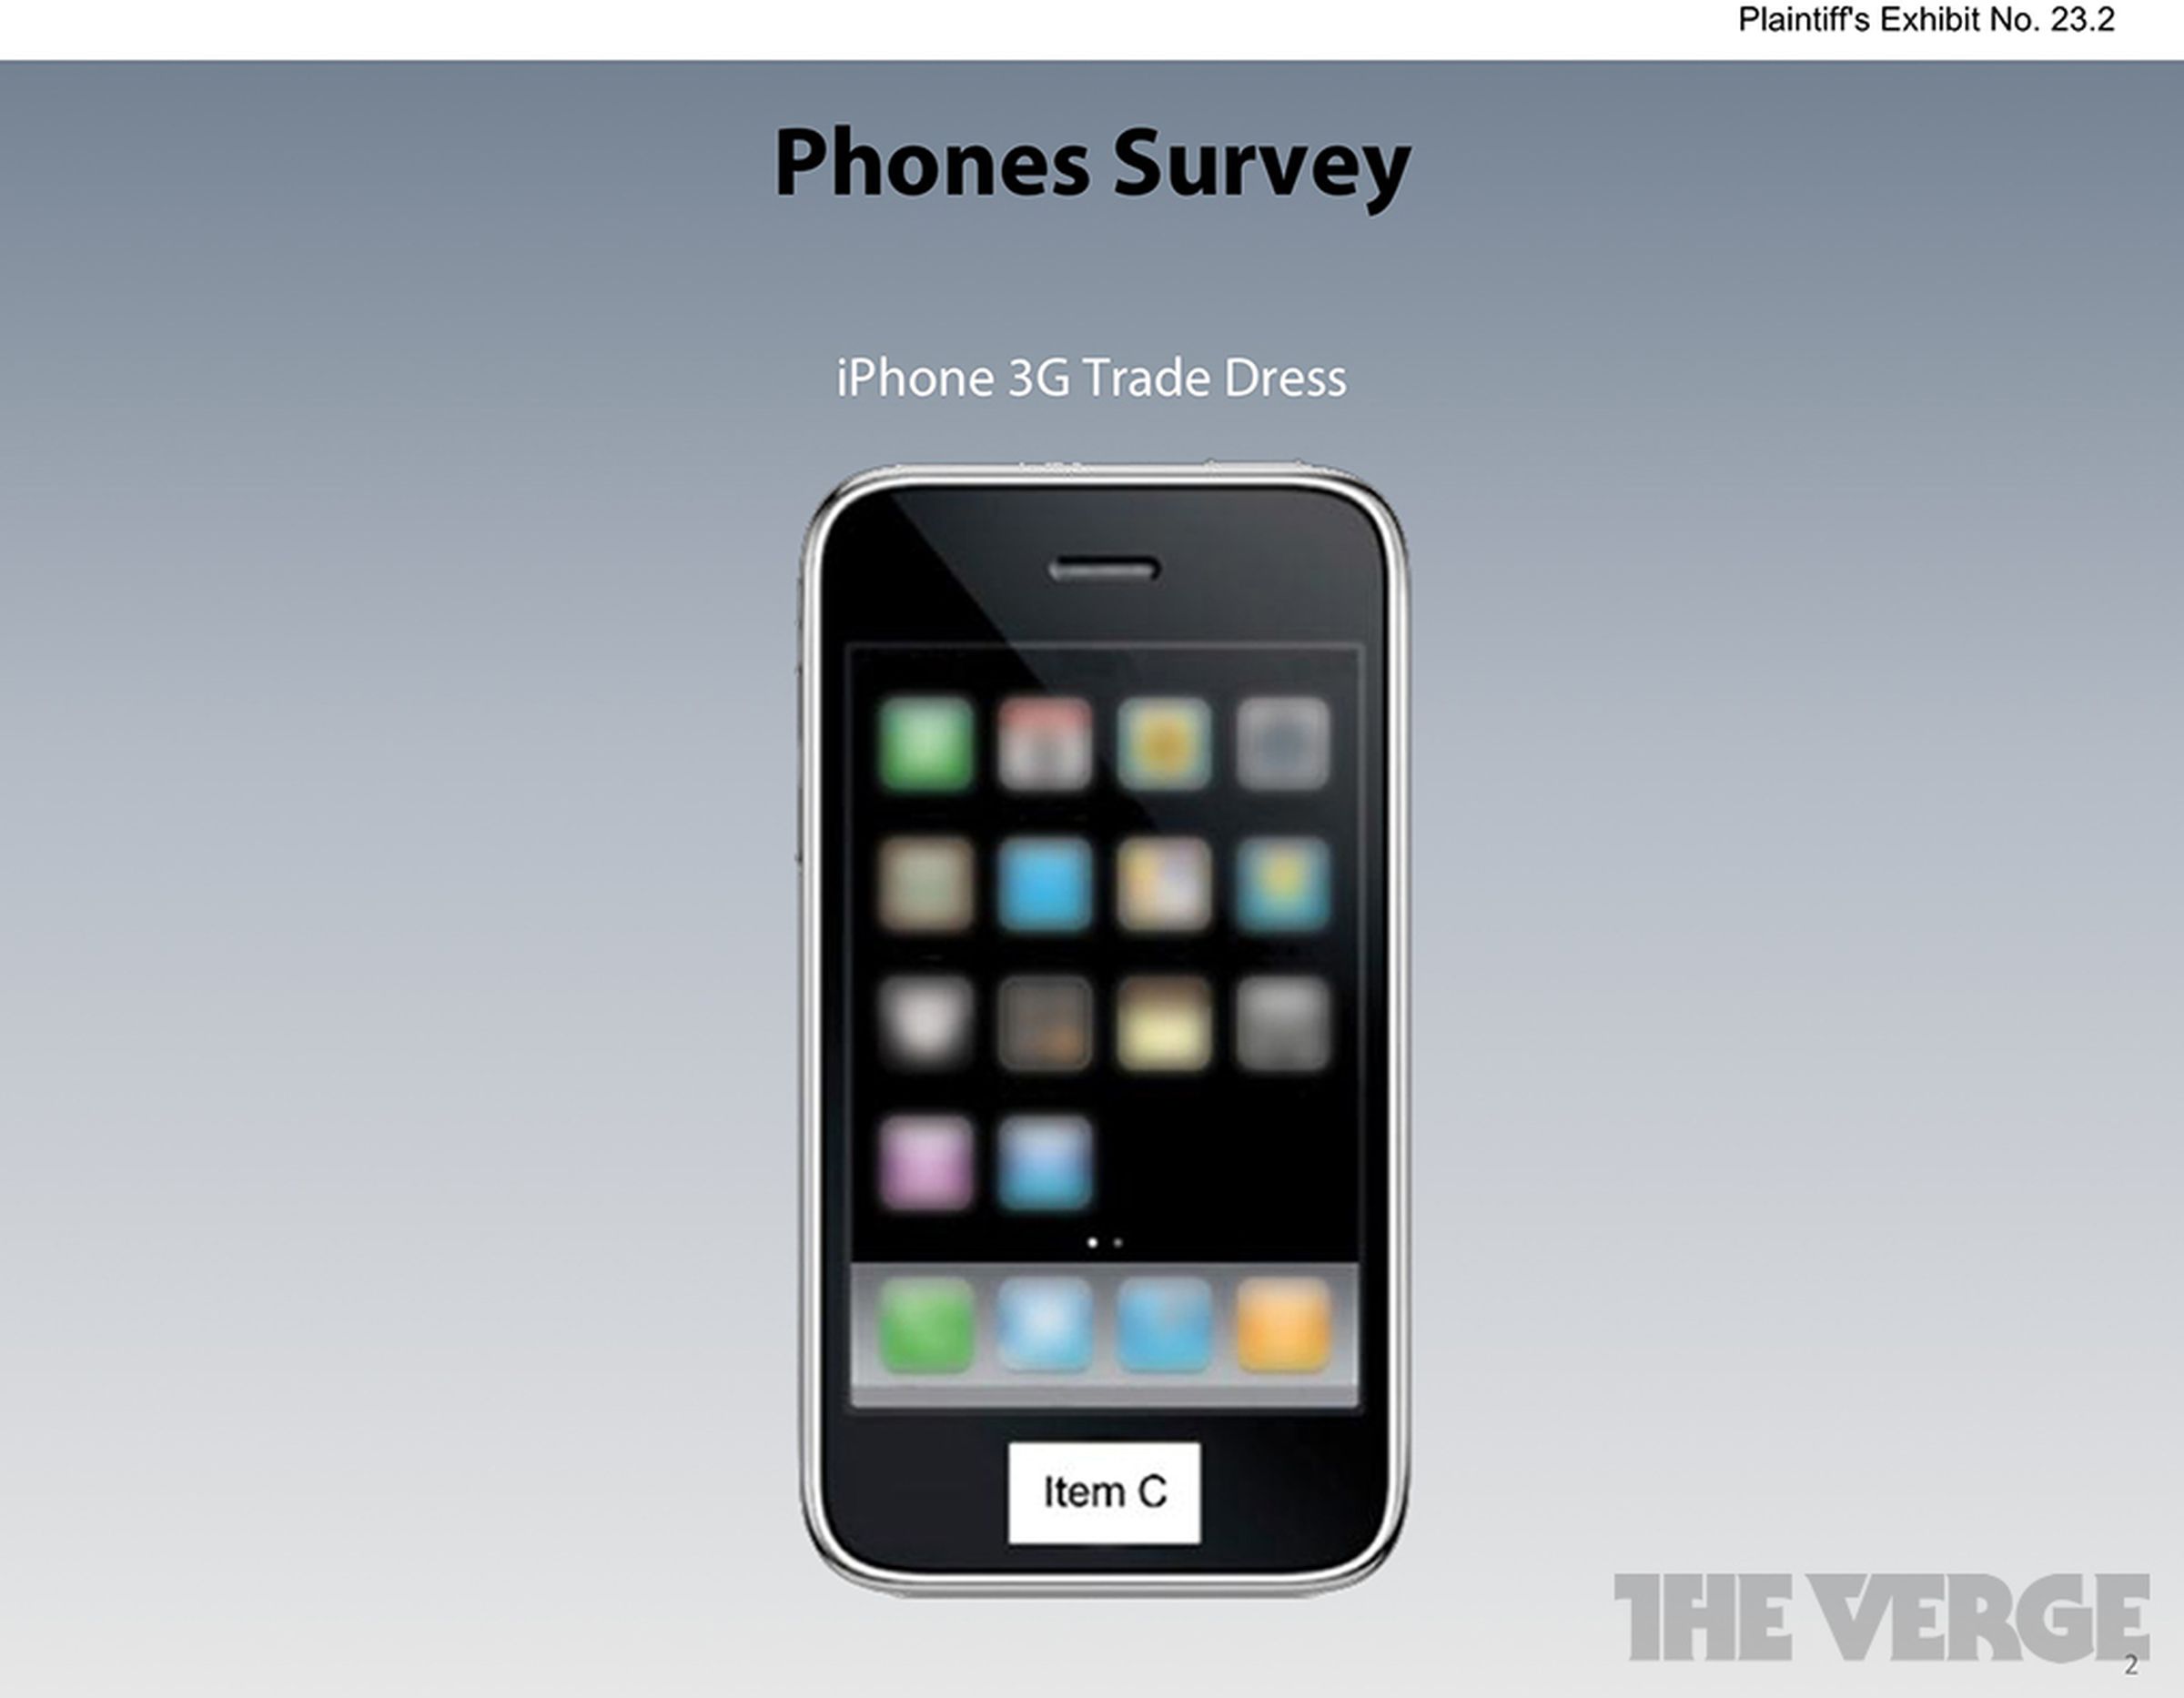 iPhone and iPad Recognition Survey images